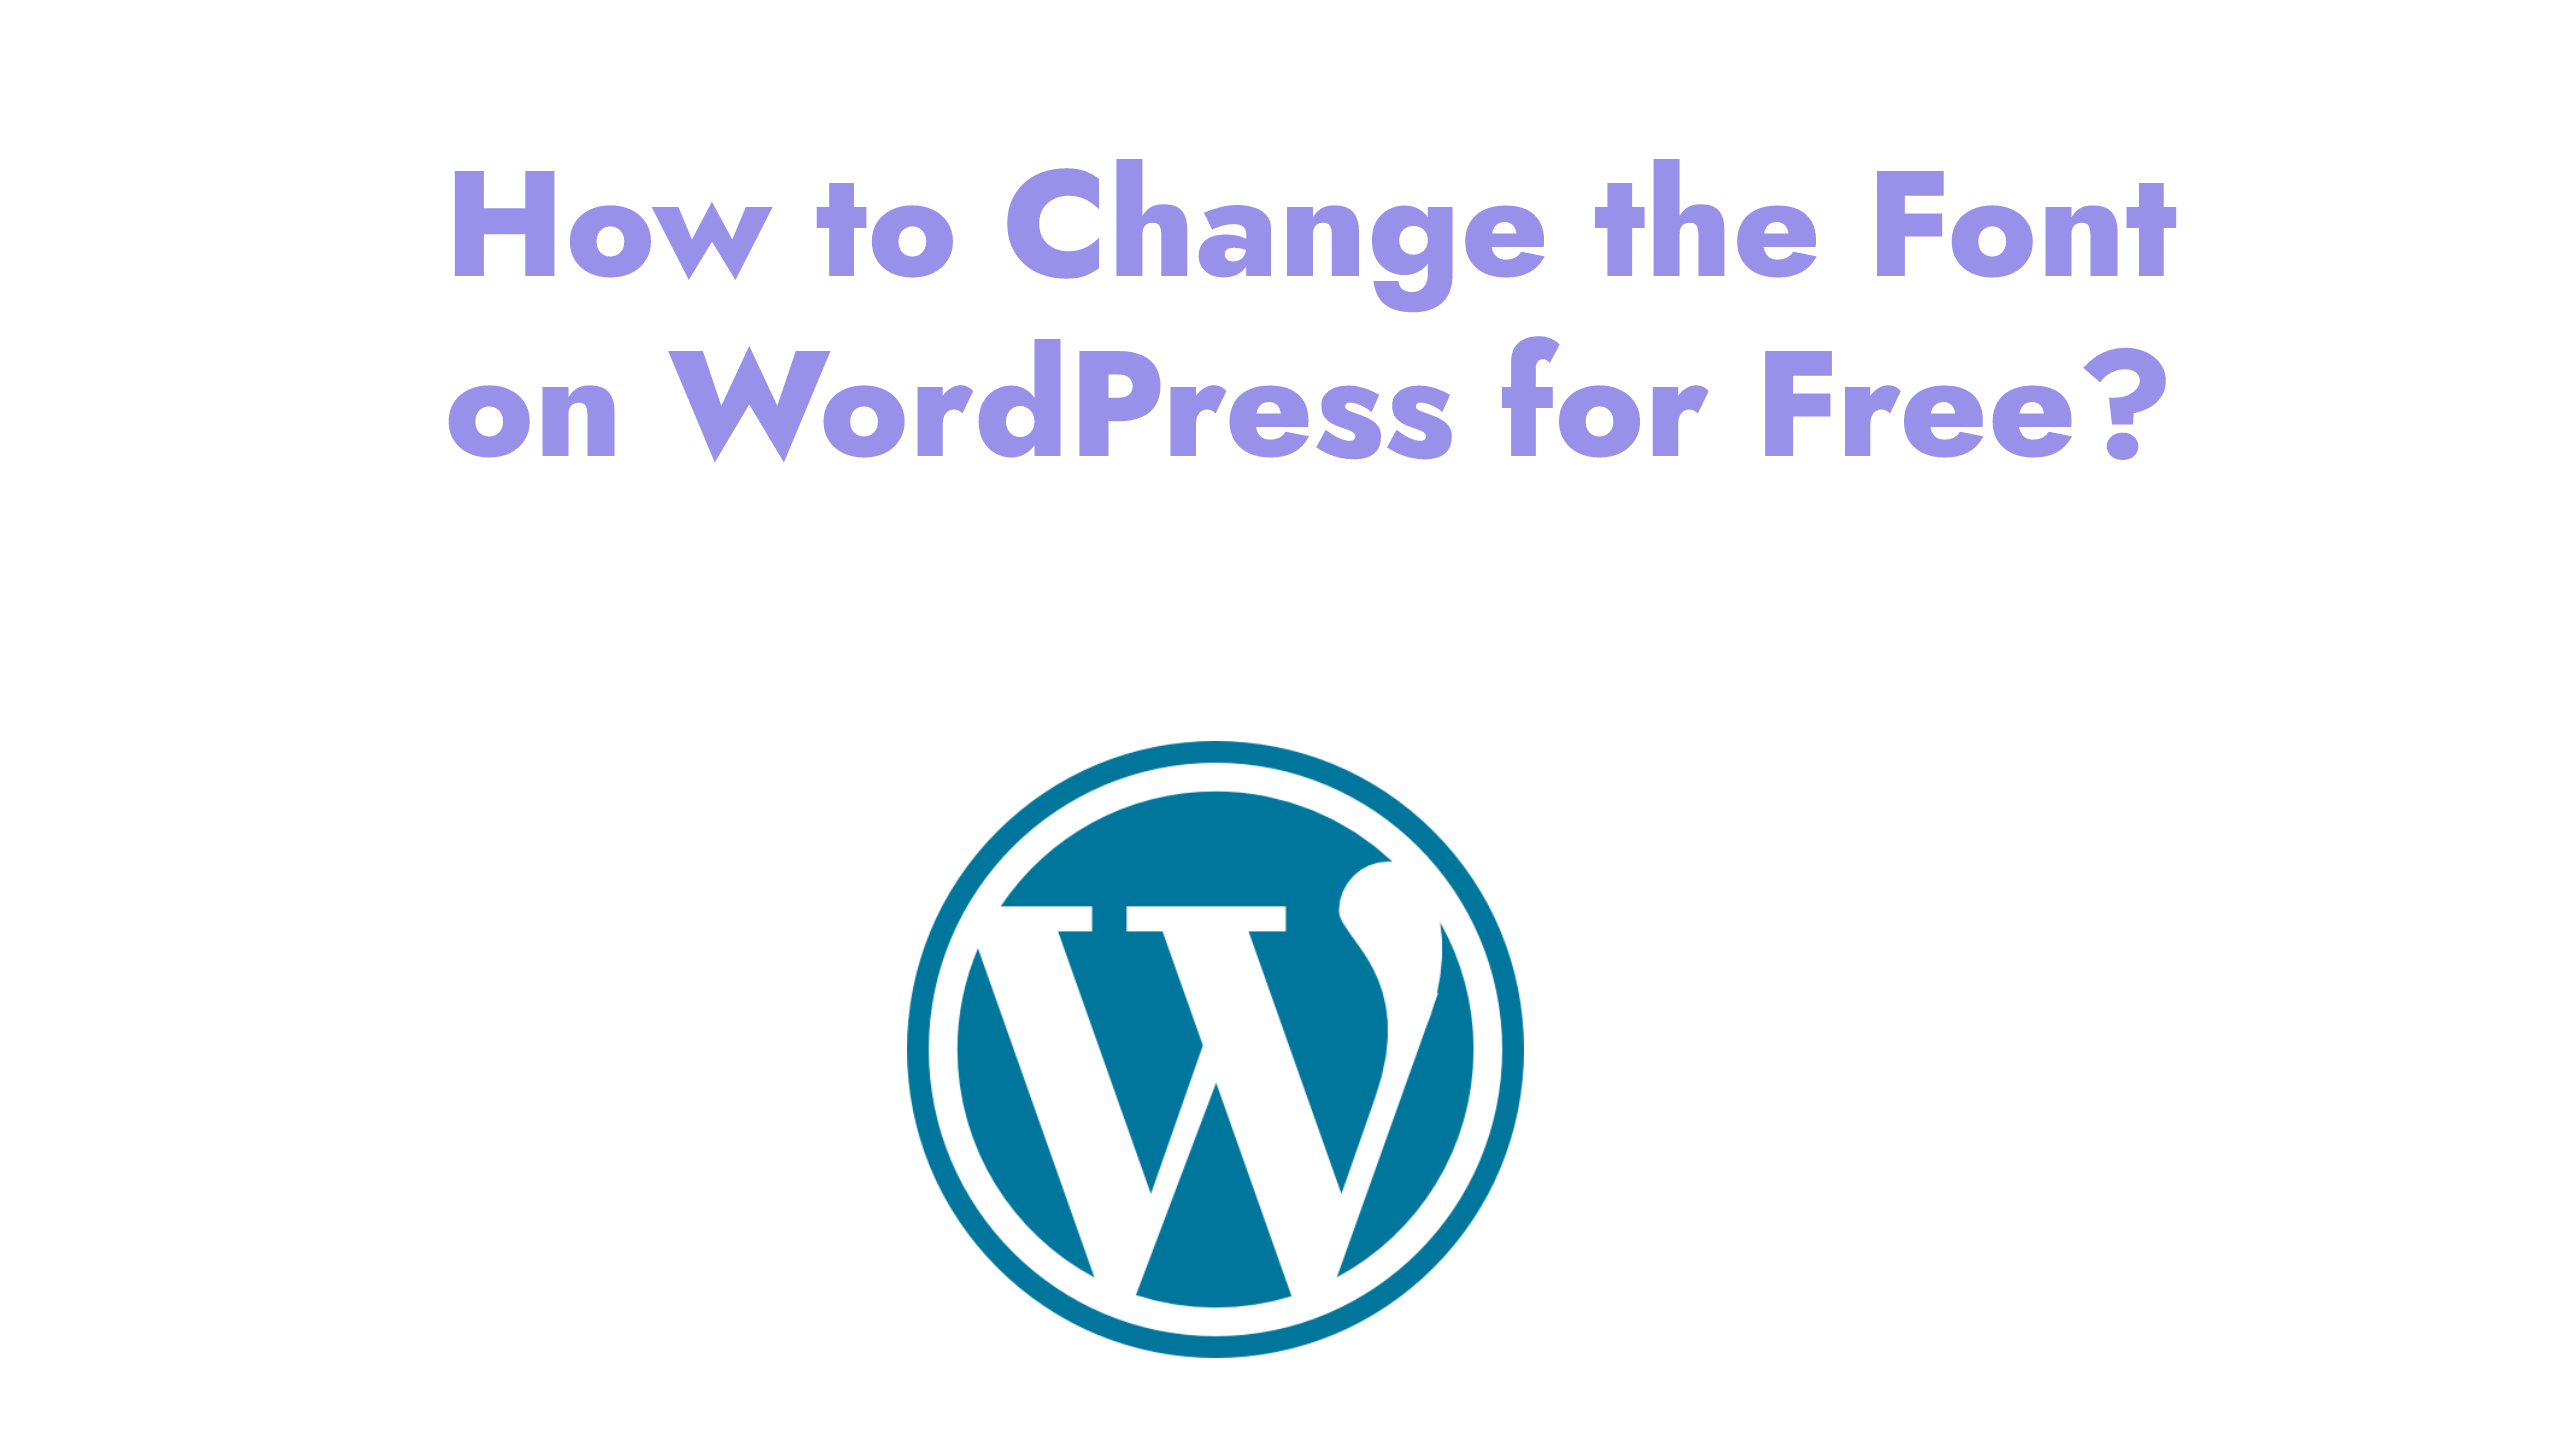 How to Change the Font on WordPress for Free?